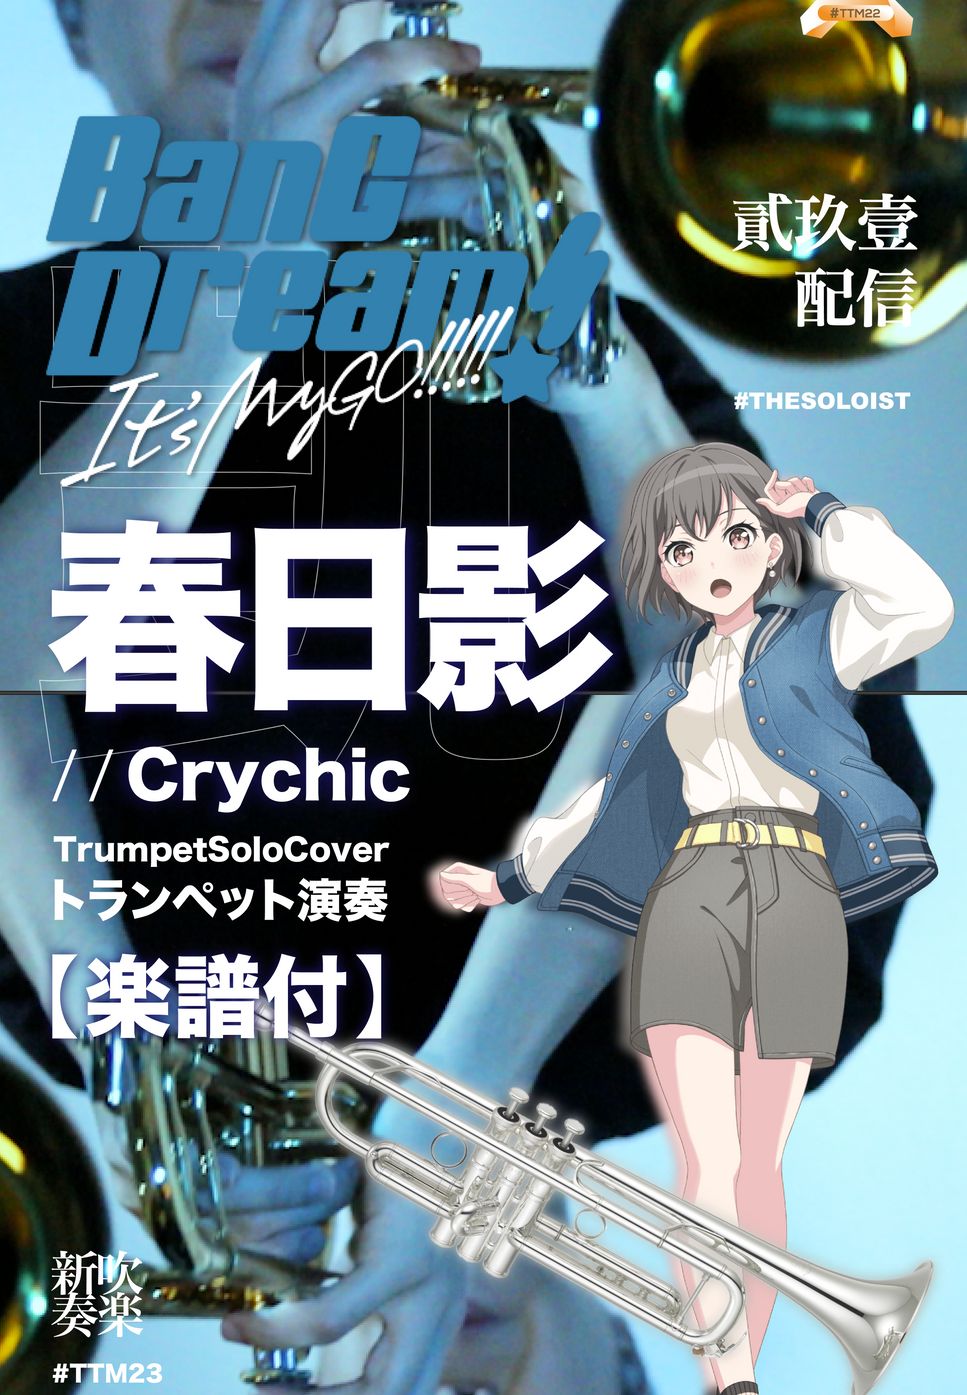 Crychic - 春日影 (C/ Bb/ F/ Eb Solo Sheet Music) by 凱